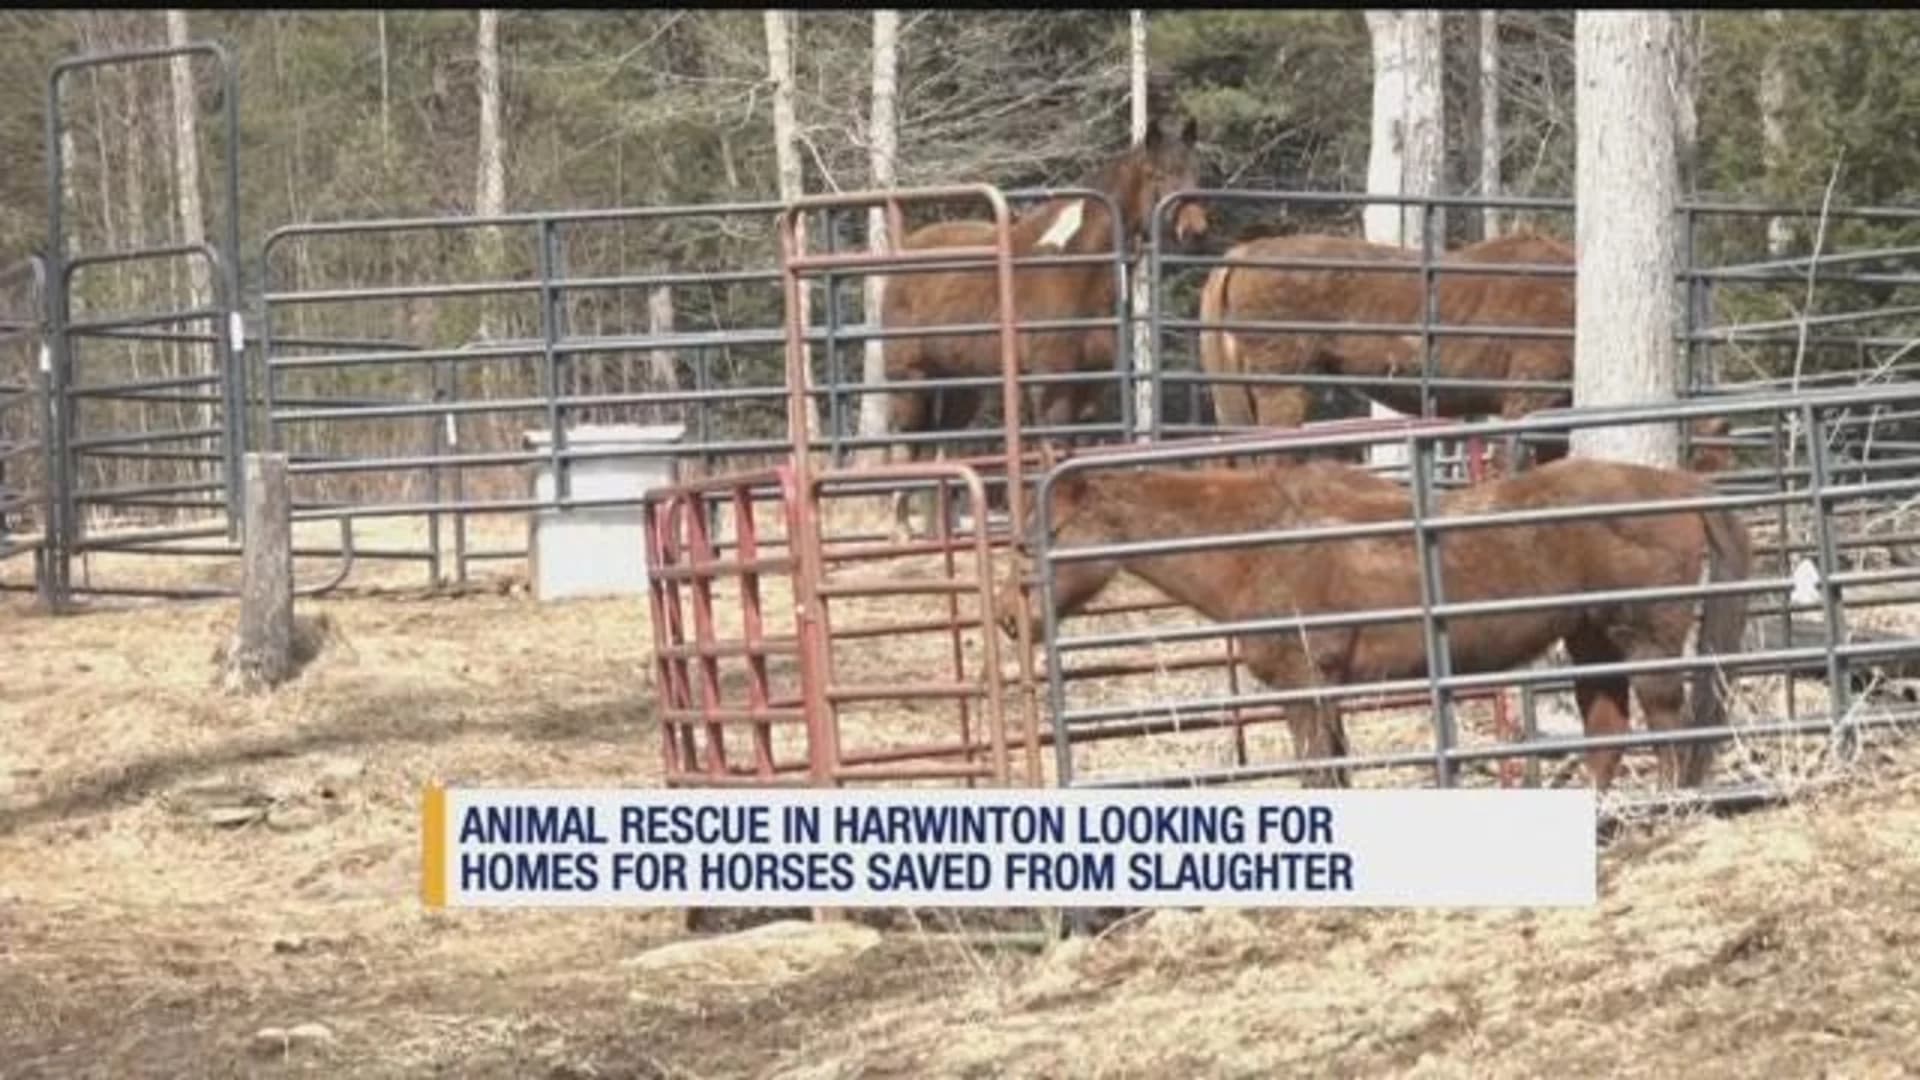 Wild horses: Group hopes to find 'forever homes' to save animals from slaughter